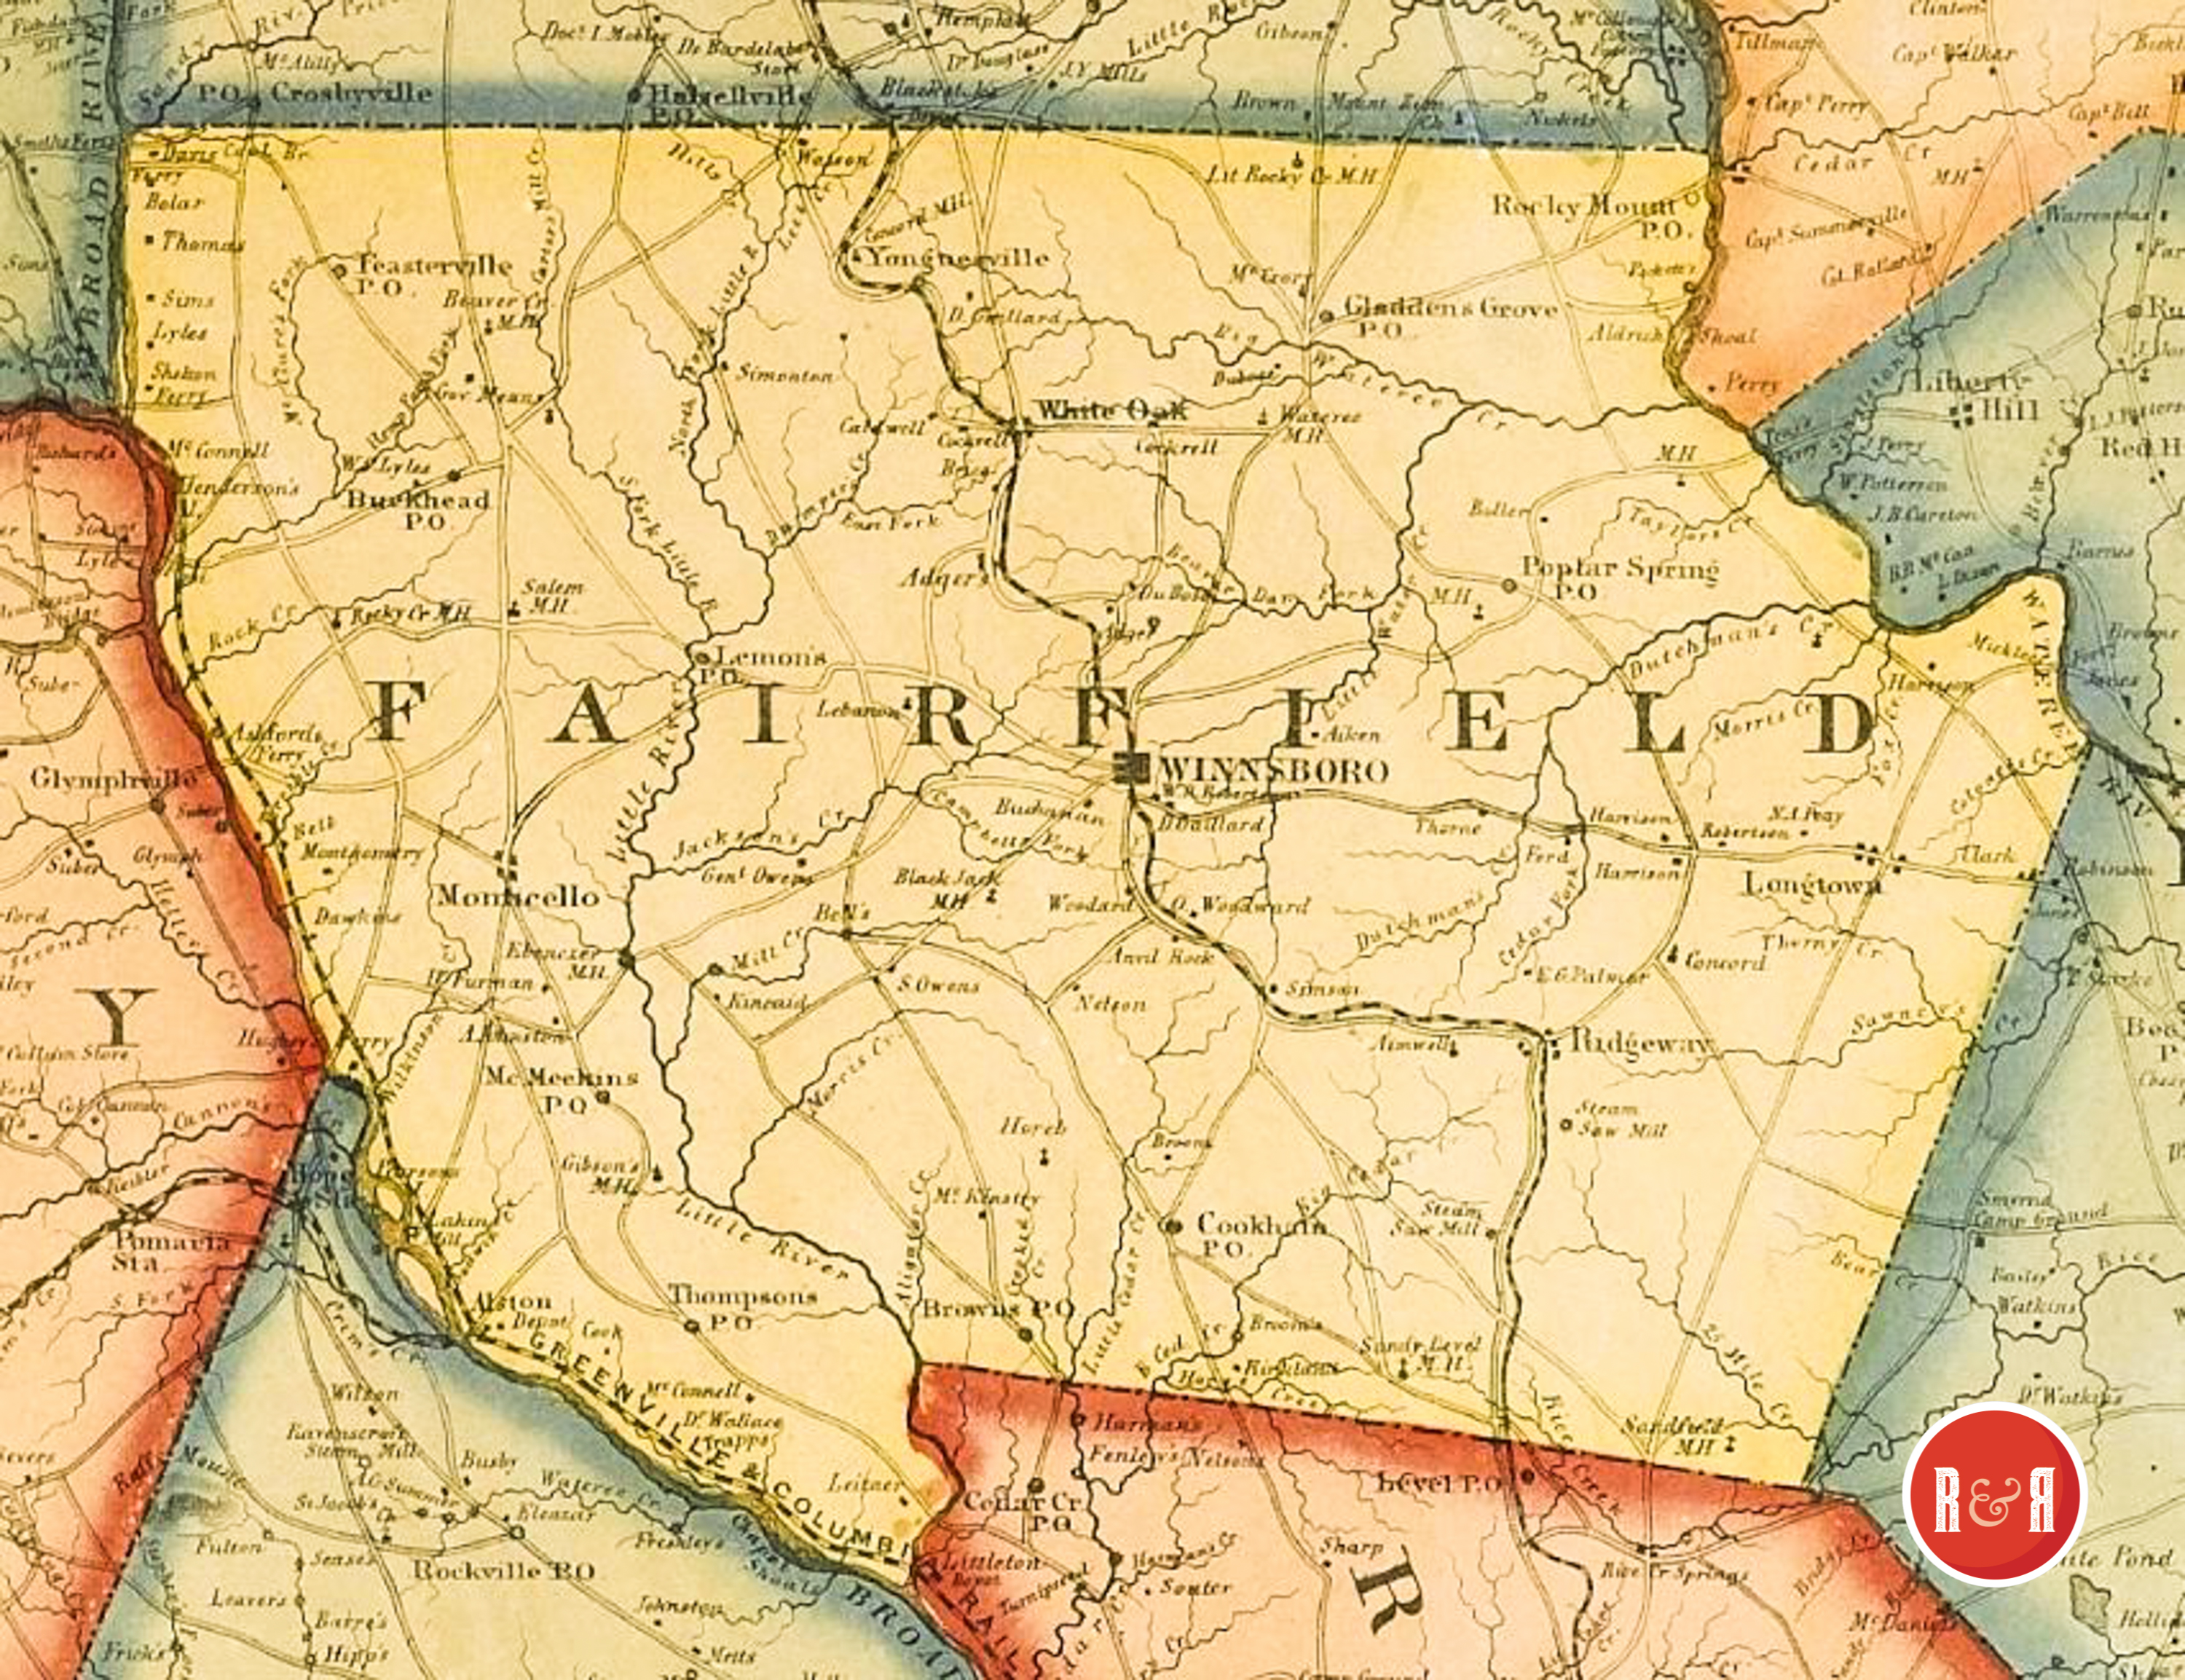 COLTON'S 1854 MAP OF FAIRFIELD COUNTY